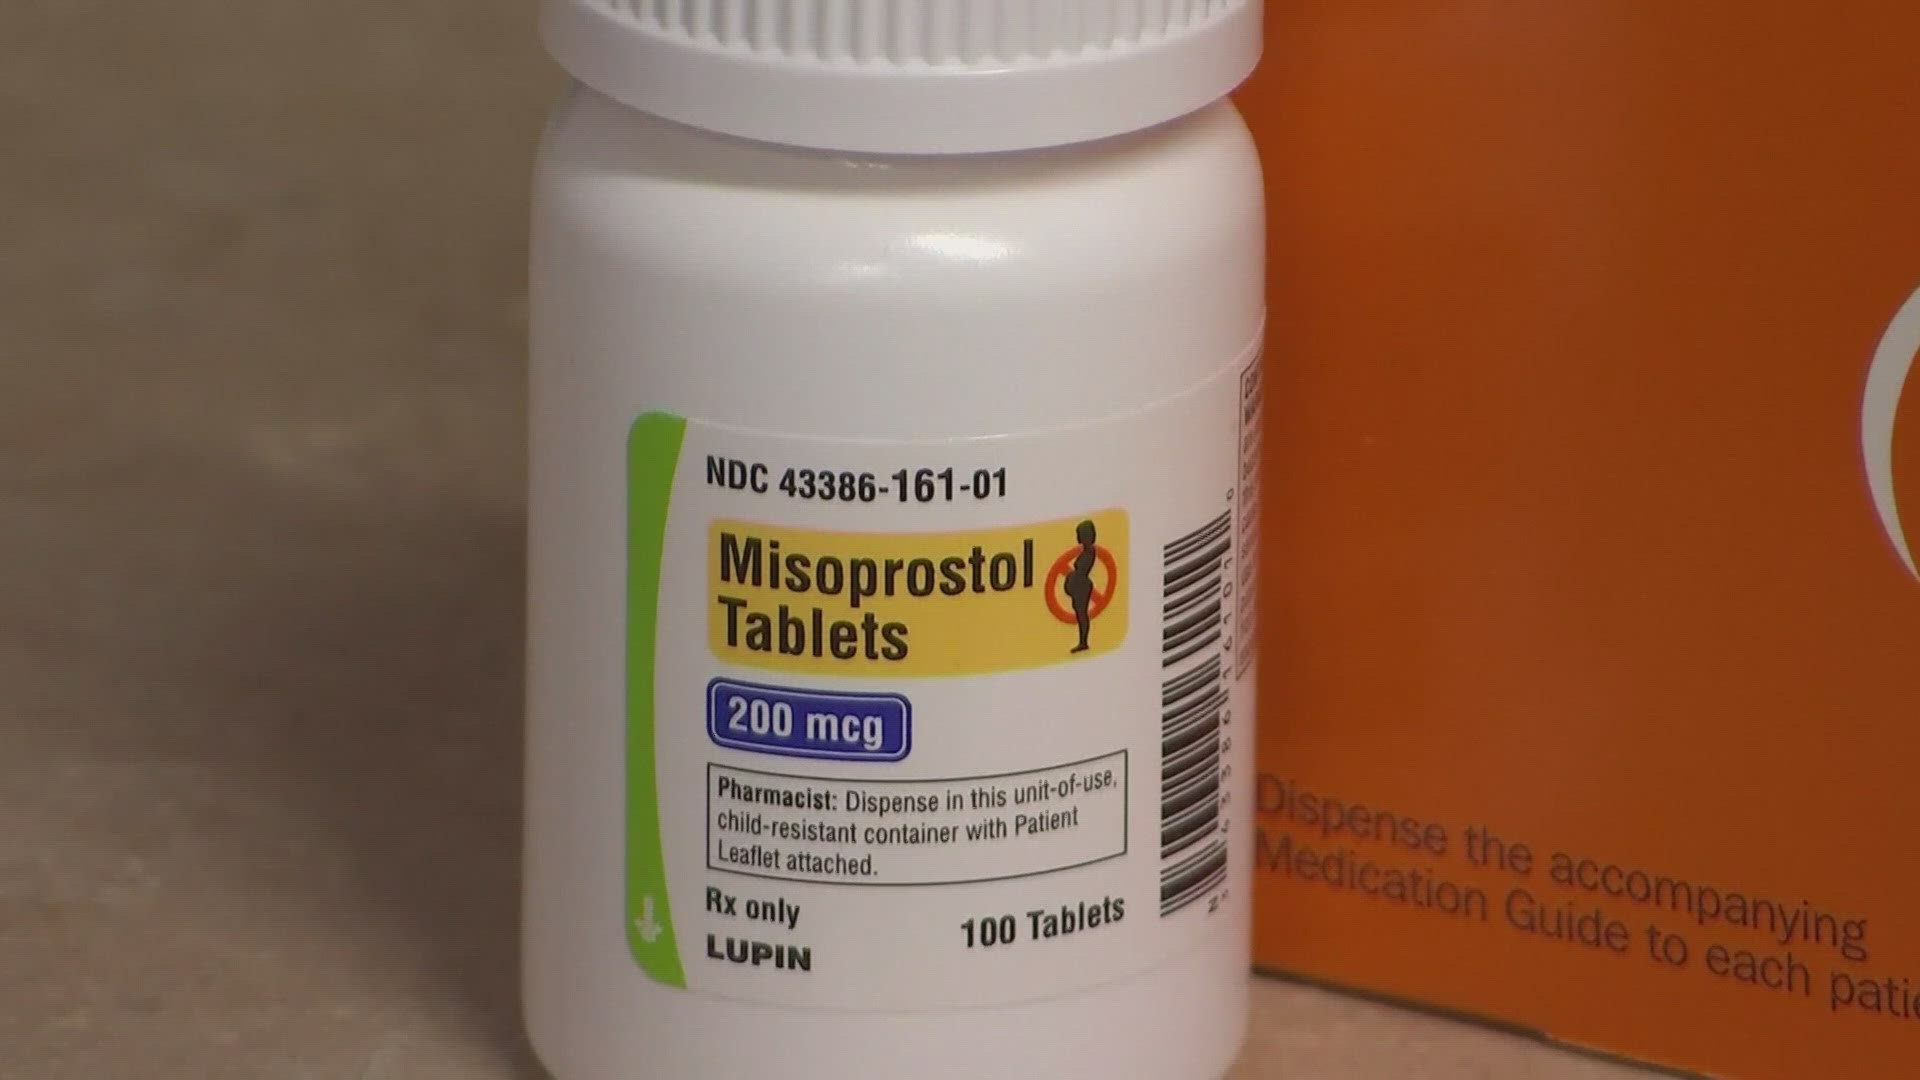 Gov. Jay Inslee announced Tuesday that Washington state has purchased a three-year supply of mifepristone.